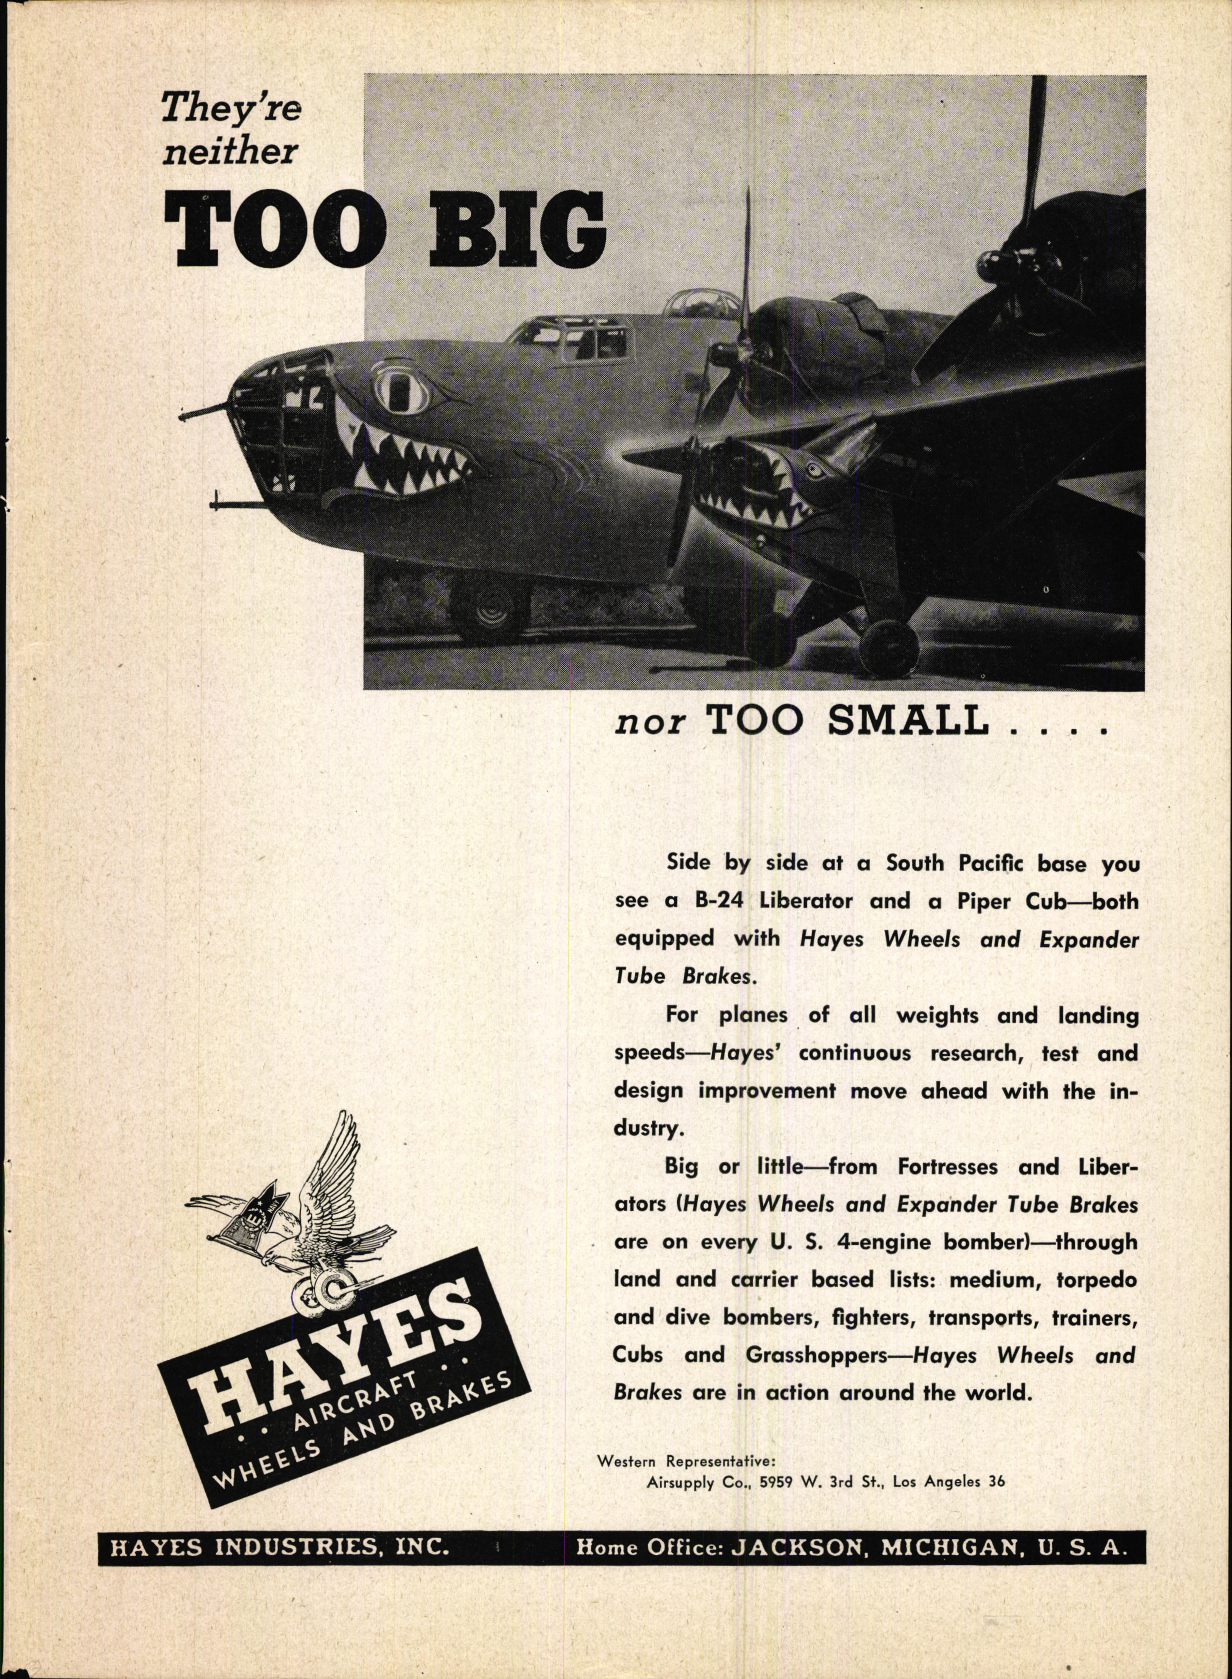 Sample page 5 from AirCorps Library document: American Aviation Magazine - Volume 7 - No. 22